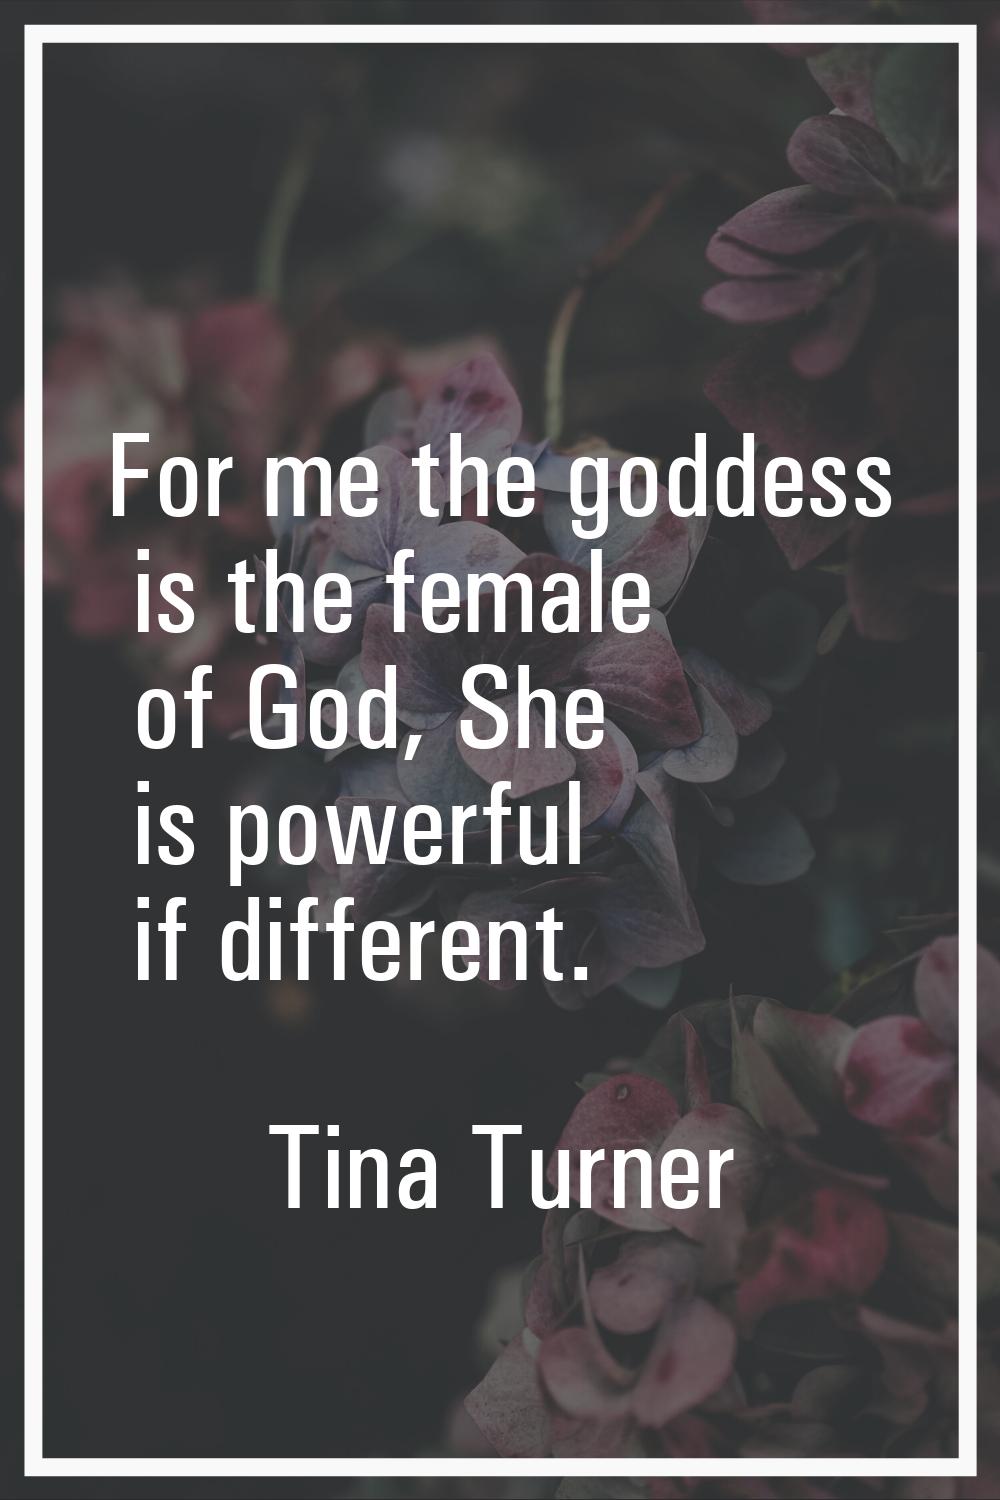 For me the goddess is the female of God, She is powerful if different.